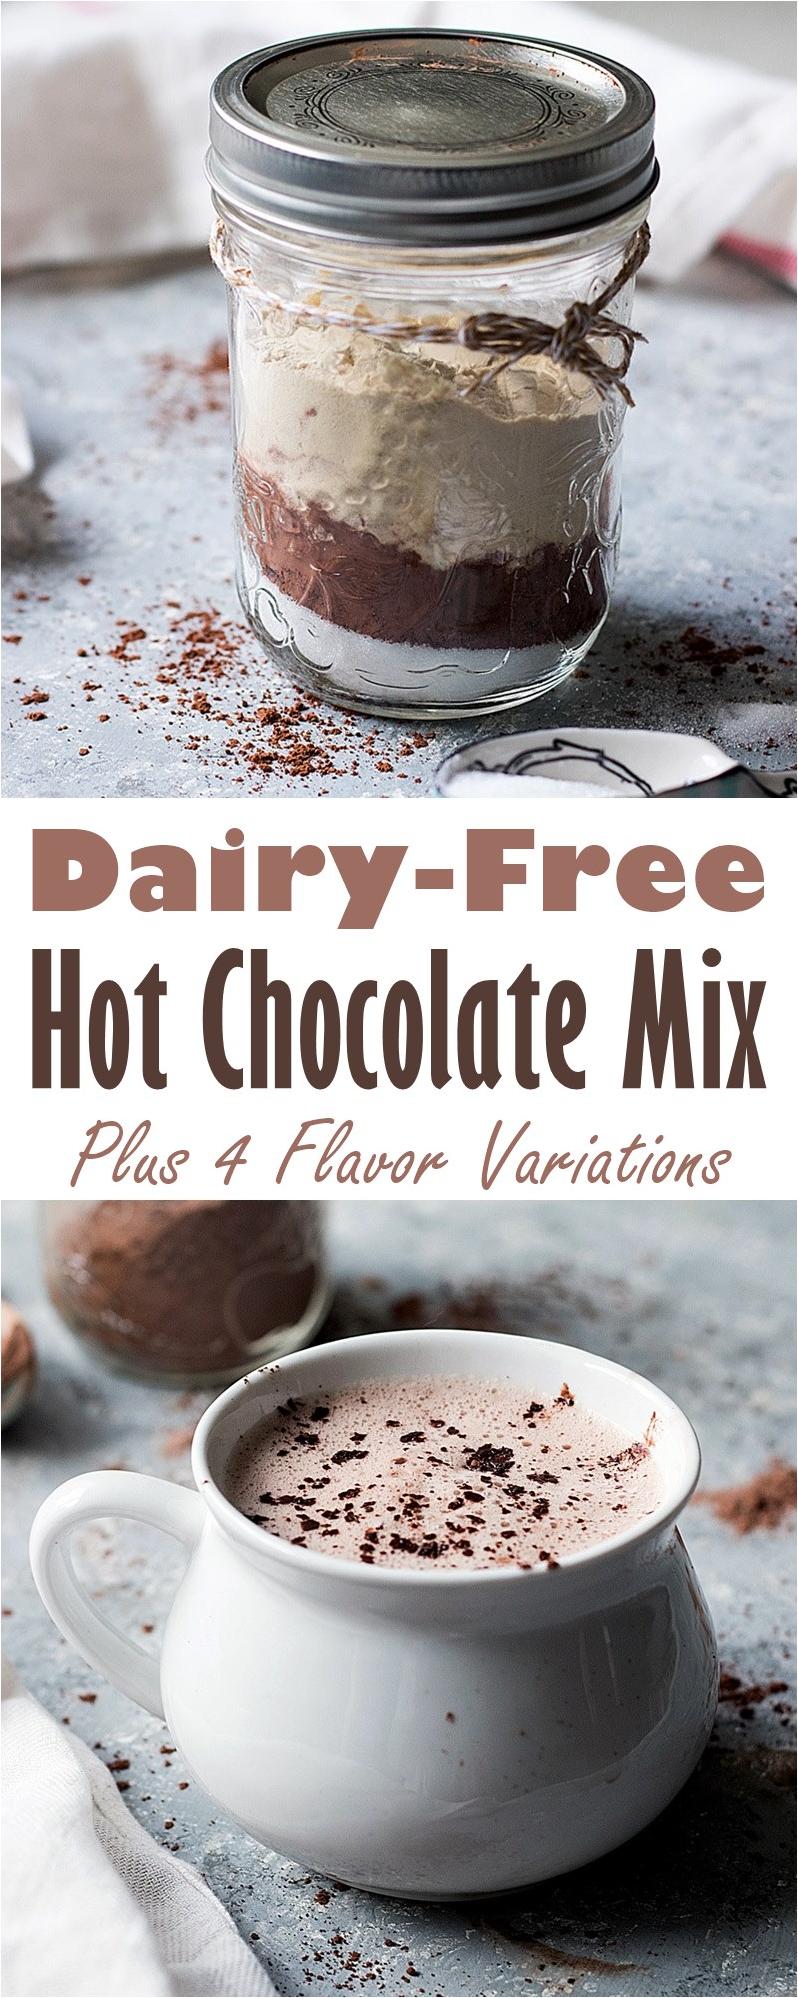  You can’t go wrong with this vegan hot chocolate mix – it’s a crowd-pleaser!